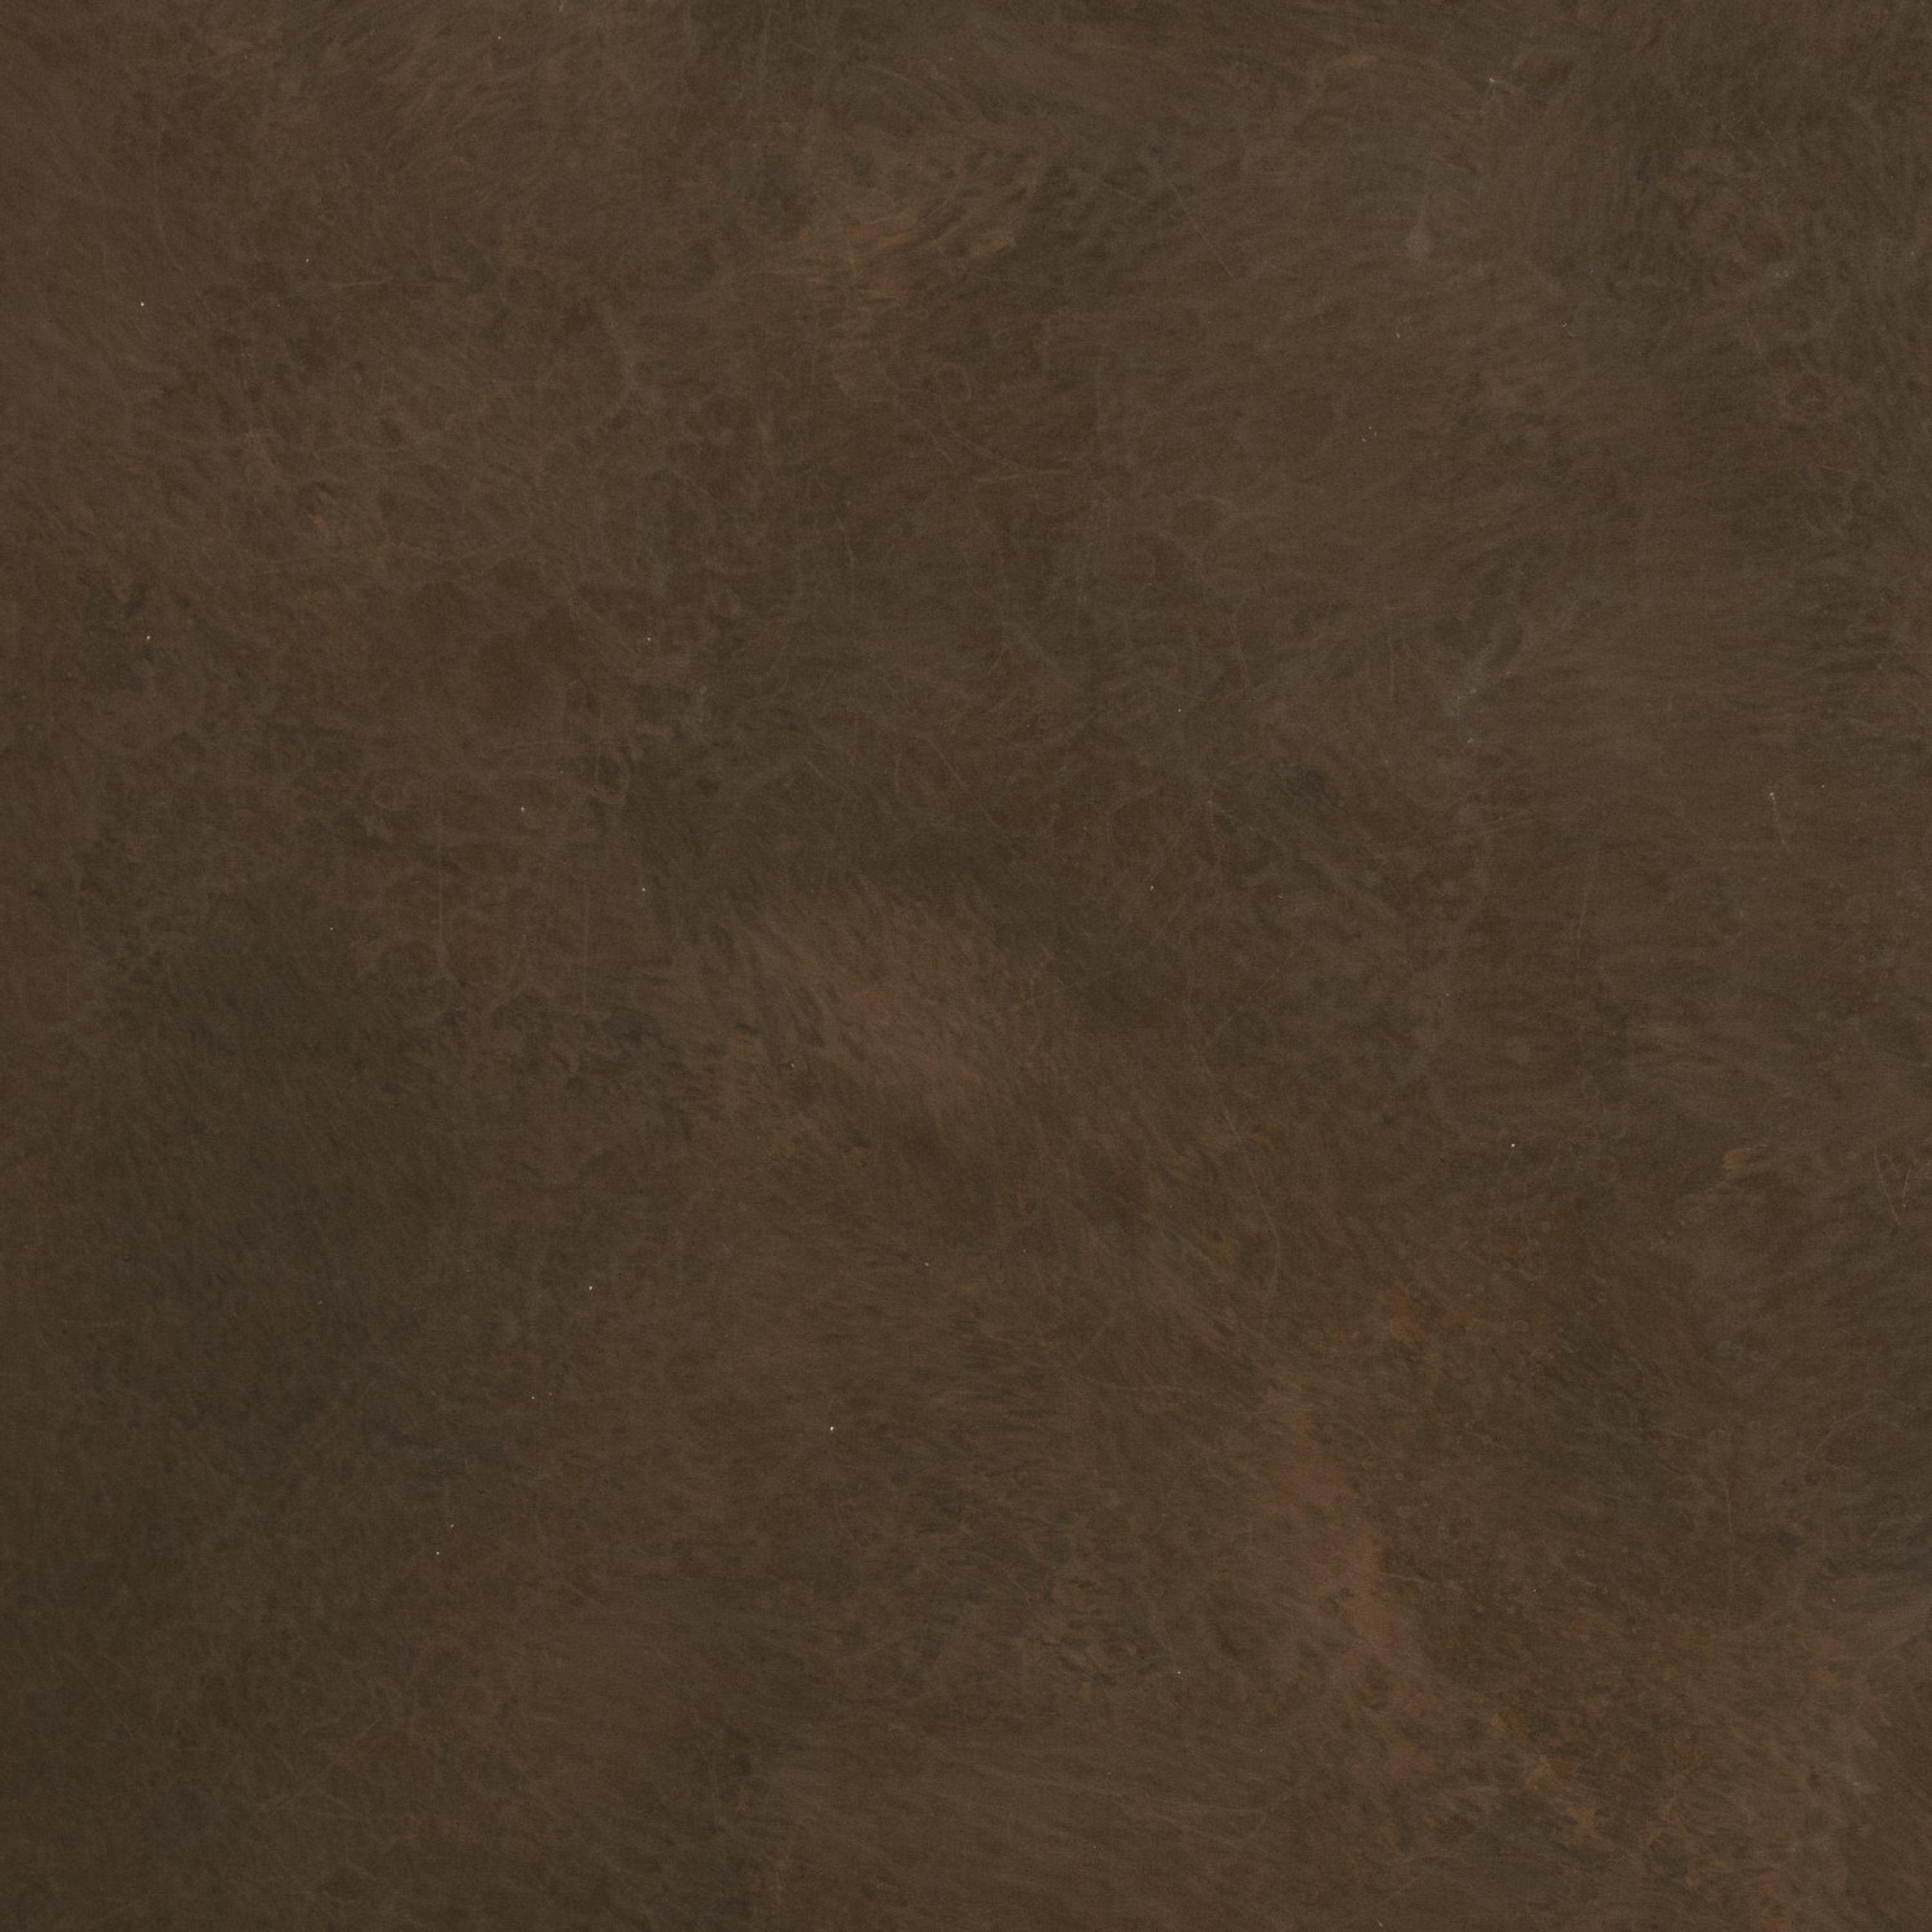 Gravity Backdrops Brown Mid Texture SM